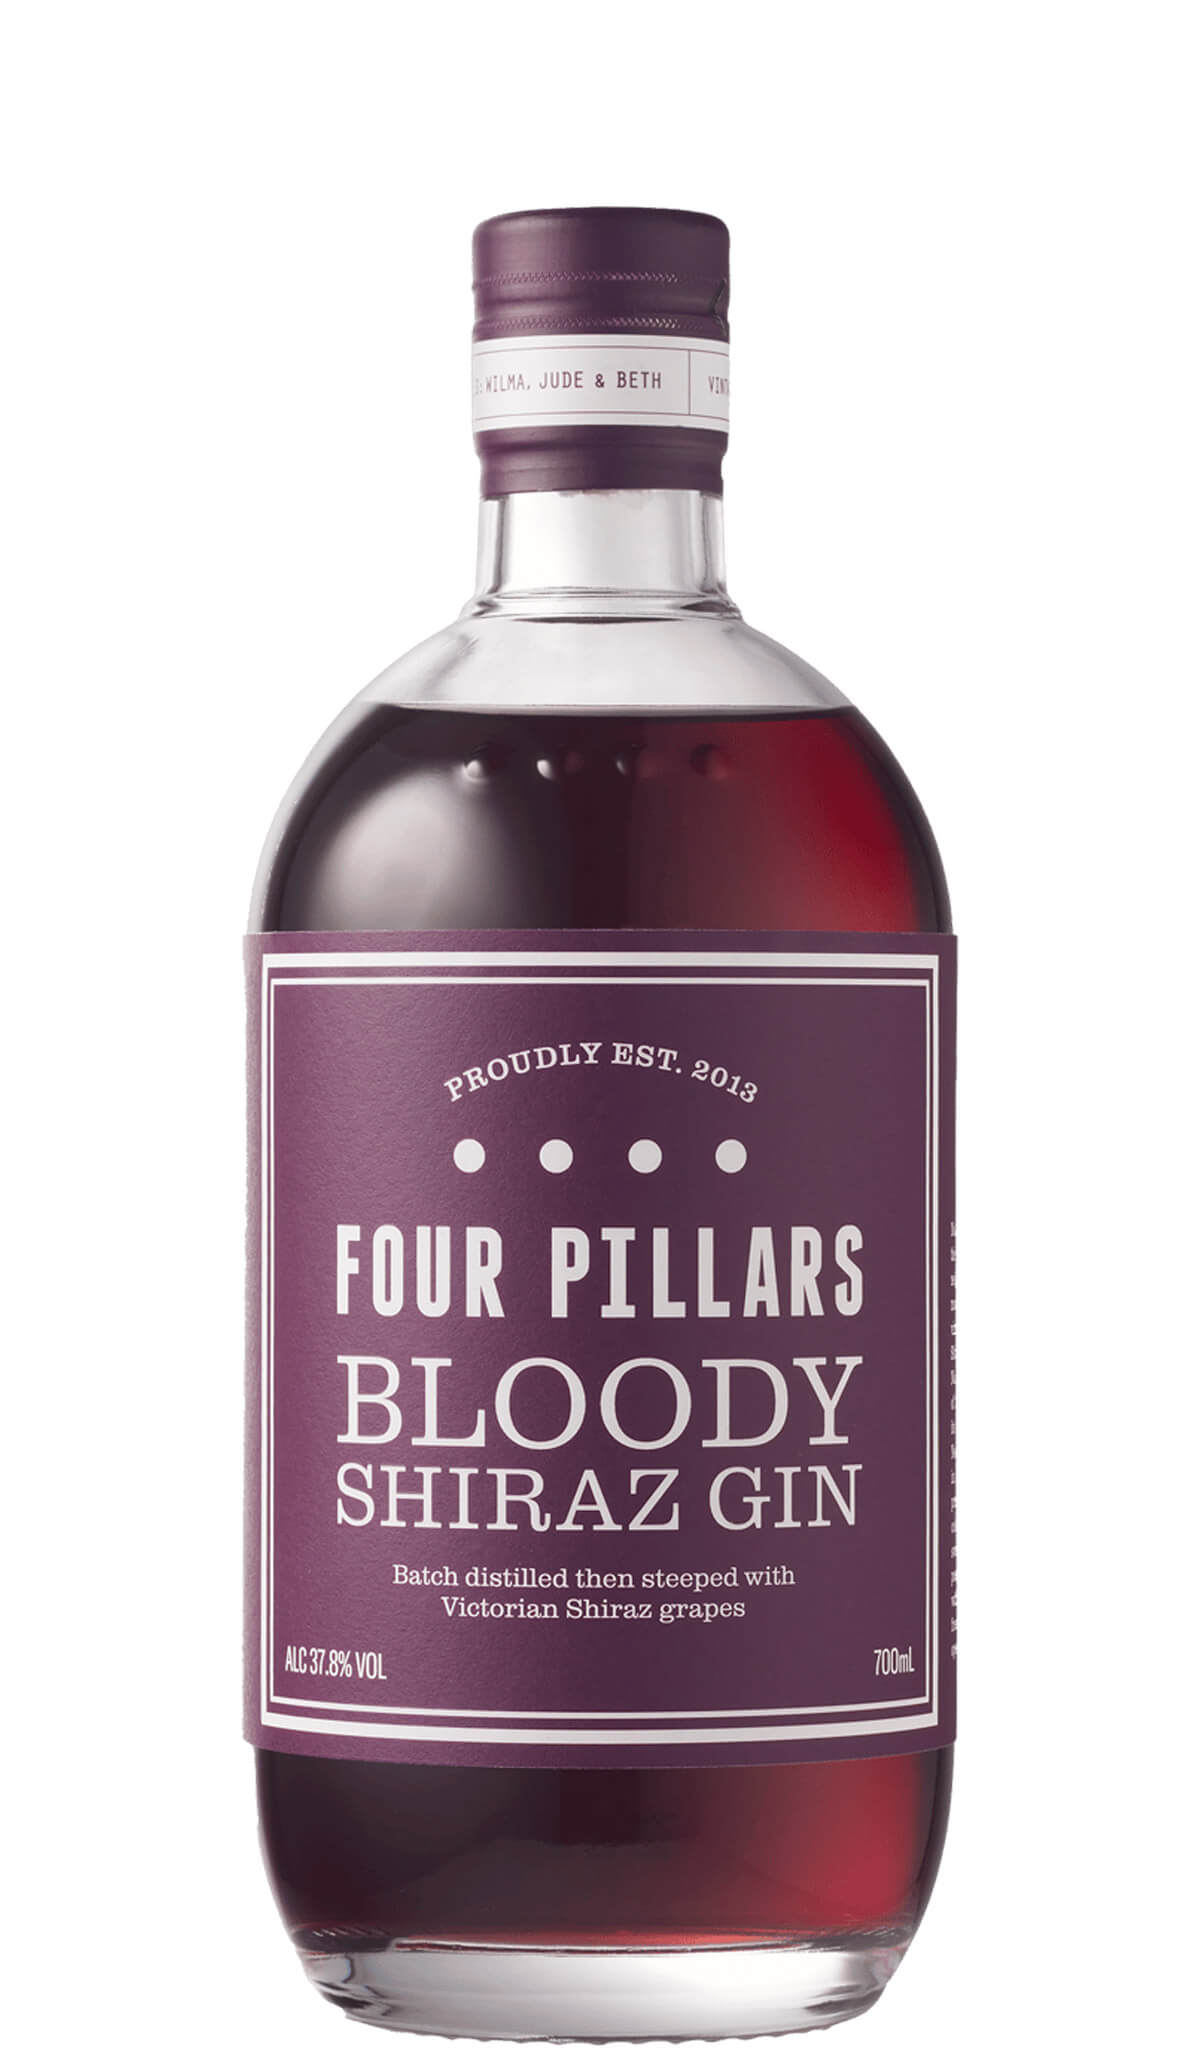 Find out more or buy Four Pillars Bloody Shiraz Gin 700mL online at Wine Sellers Direct - Australia’s independent liquor specialists.